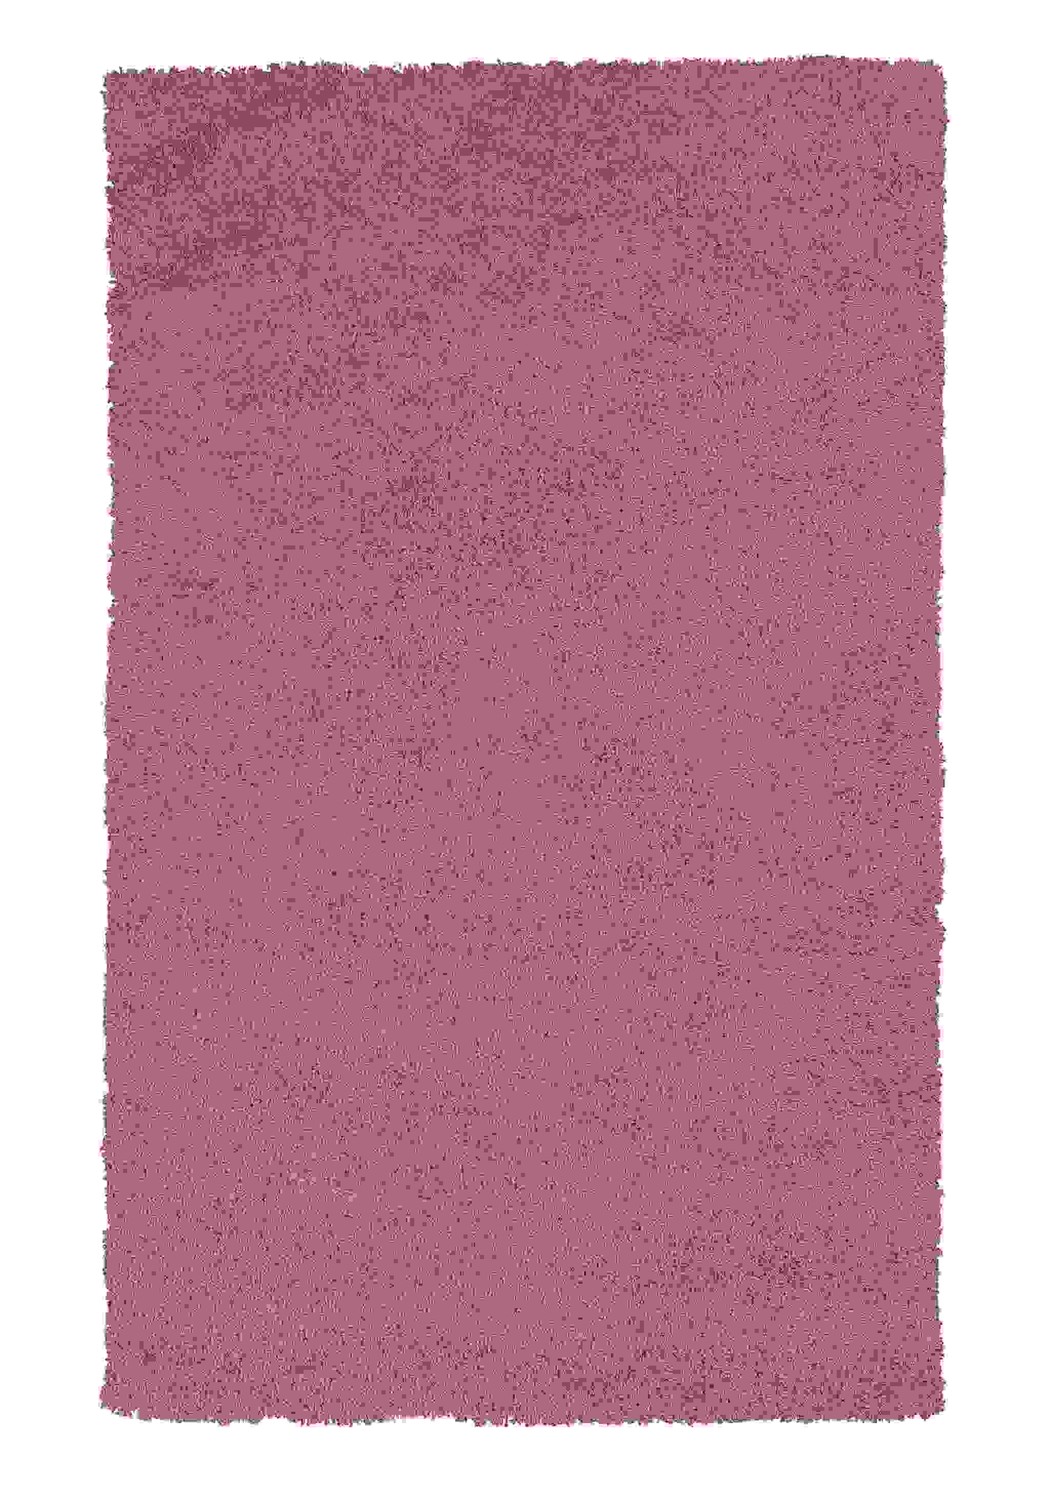 9' x 13' Polyester Hot Pink Area Rug